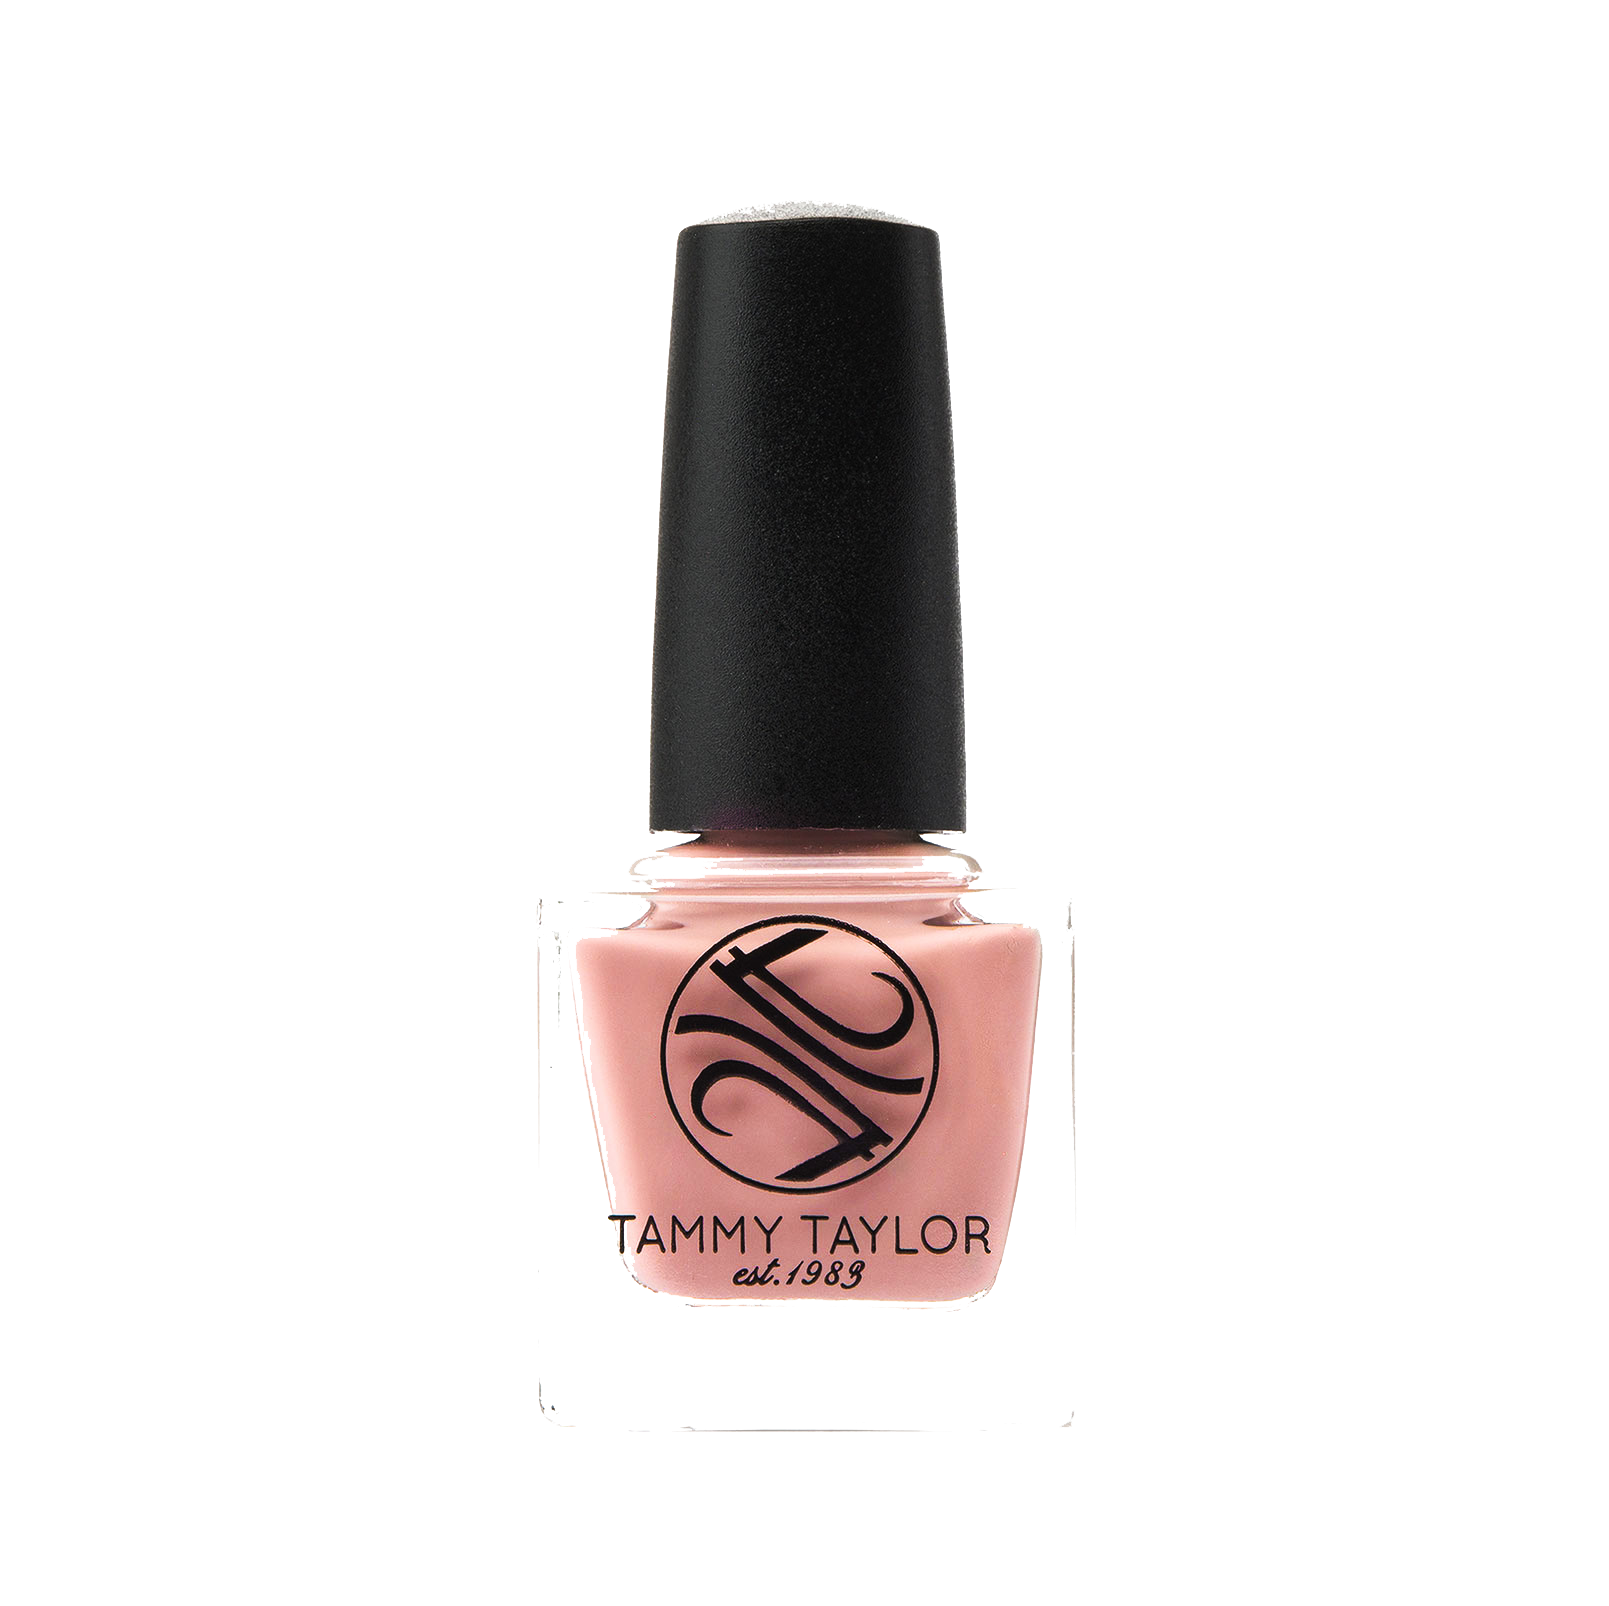 Sheer Nude Apricot Nail Lacquer